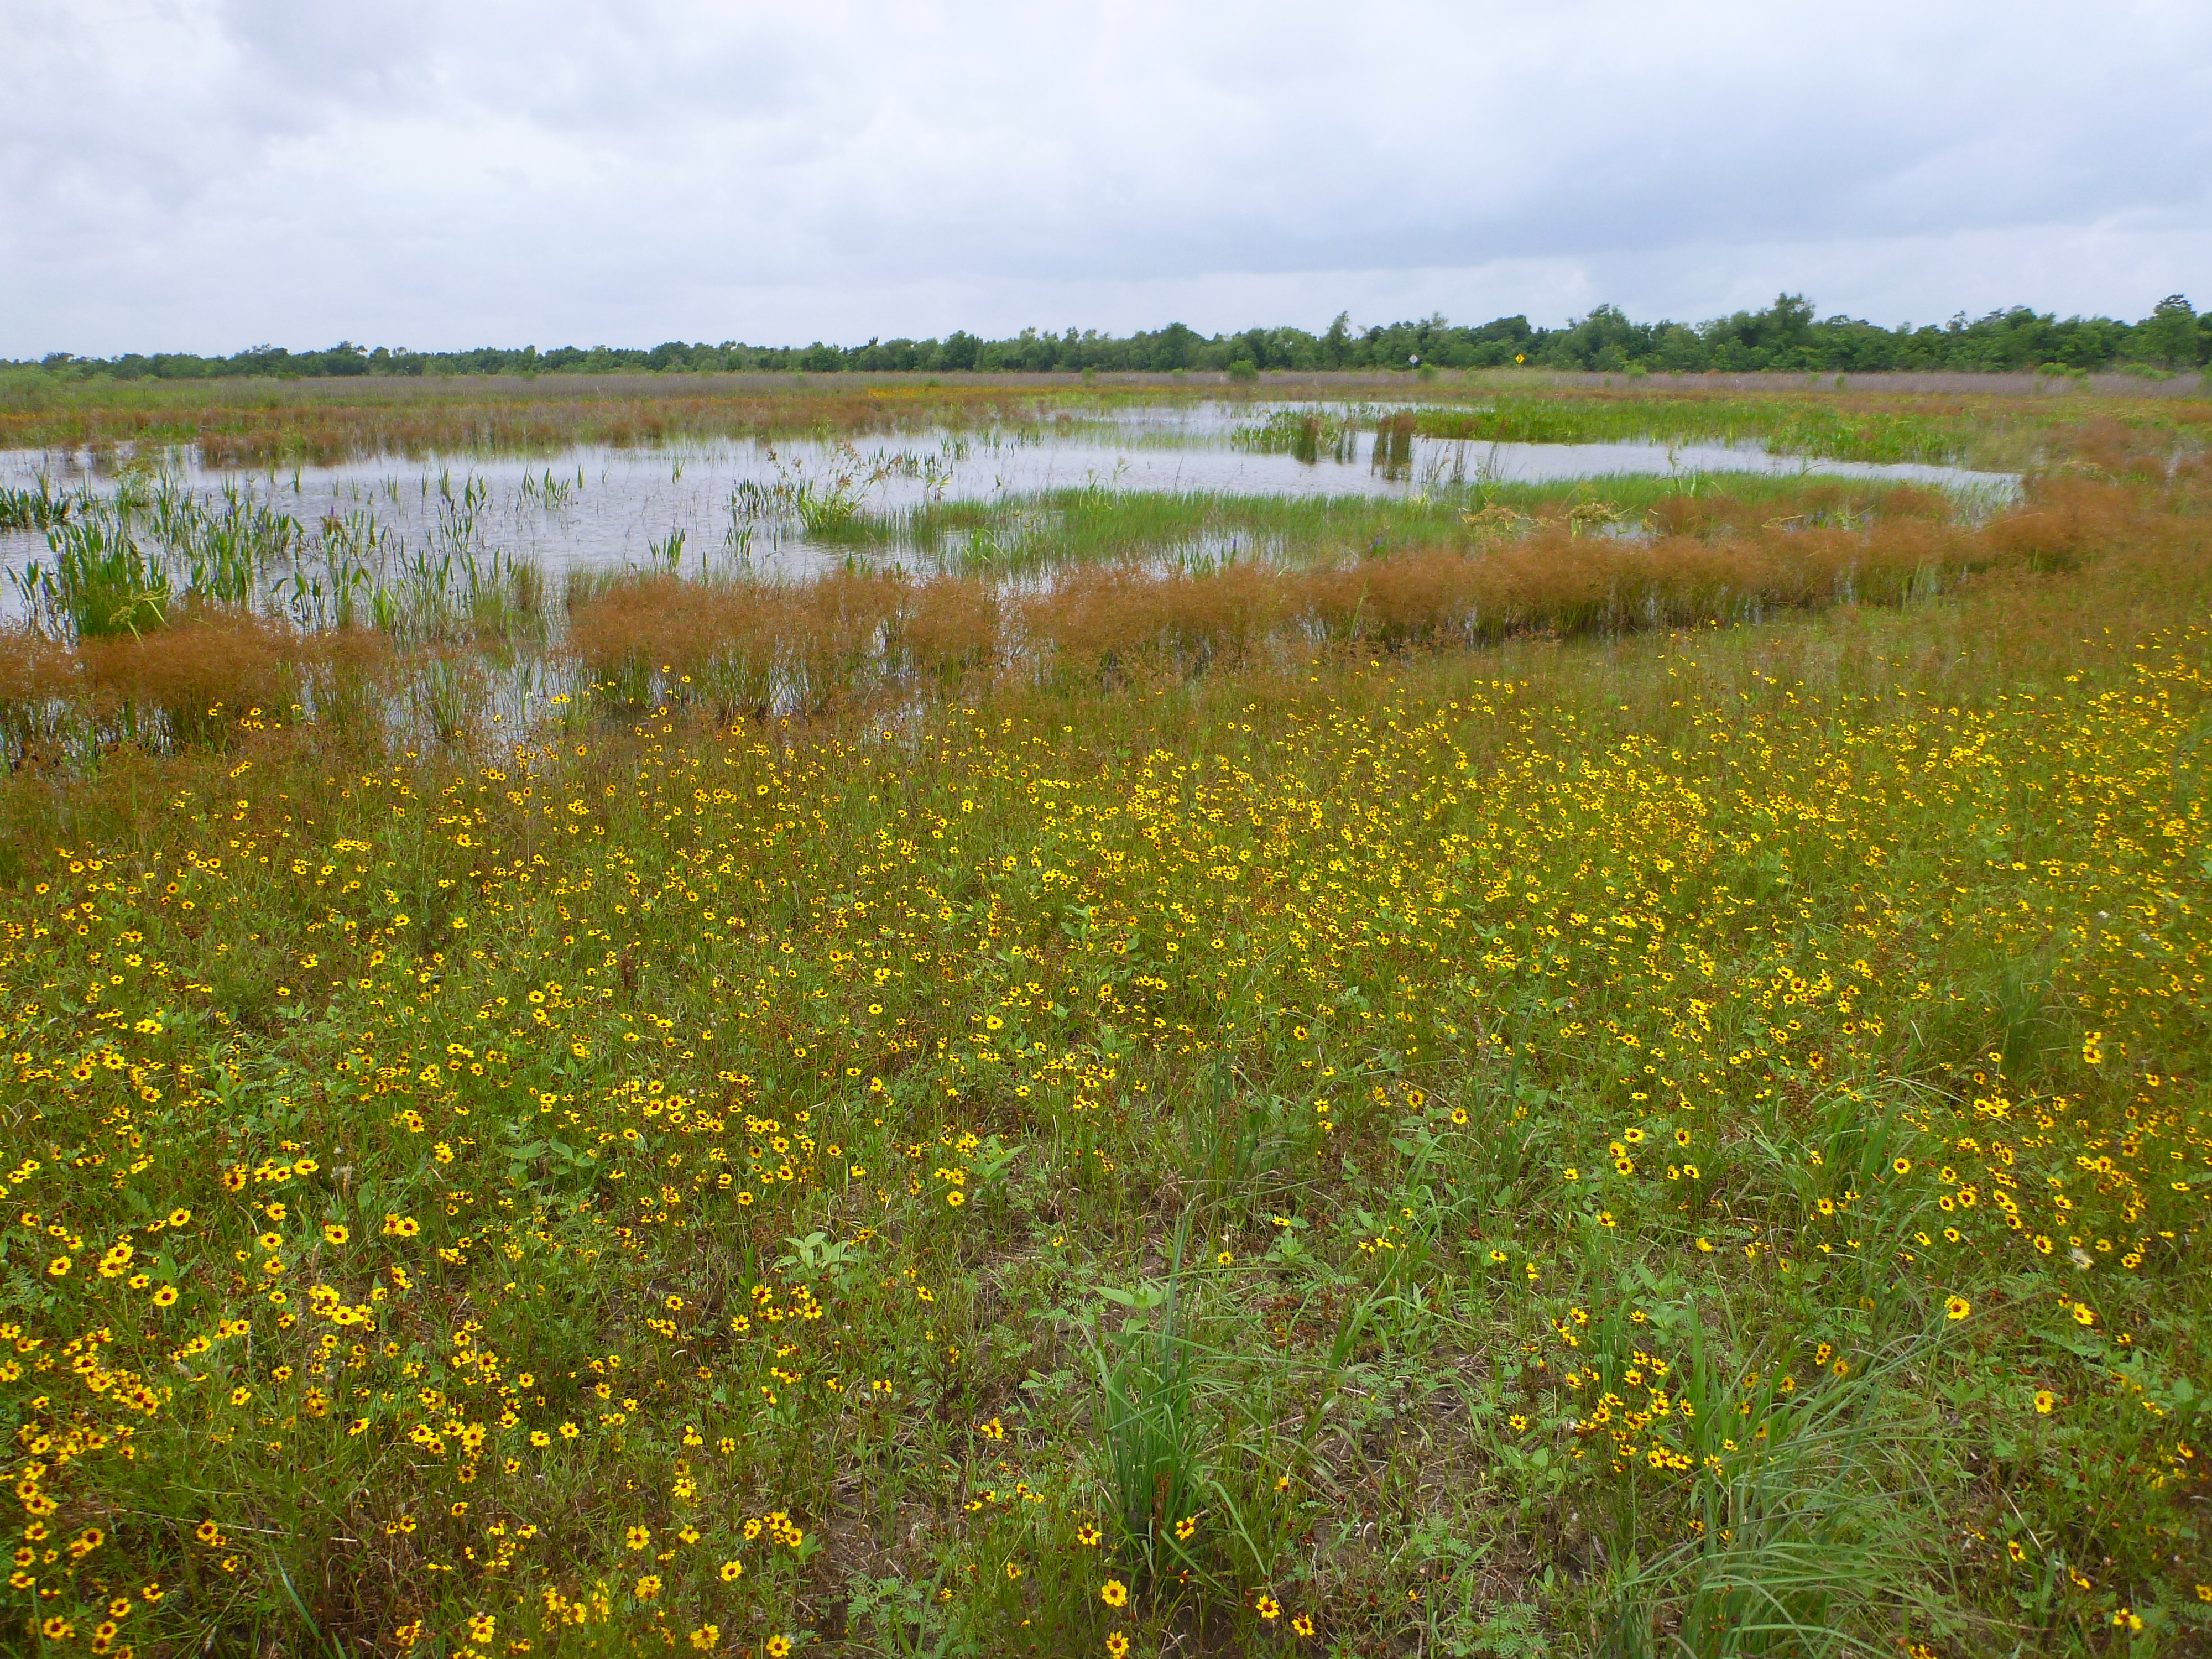 Bittern Pond (Pond 8) is in the backgound with an array of yellow flowers blooming in the foreground